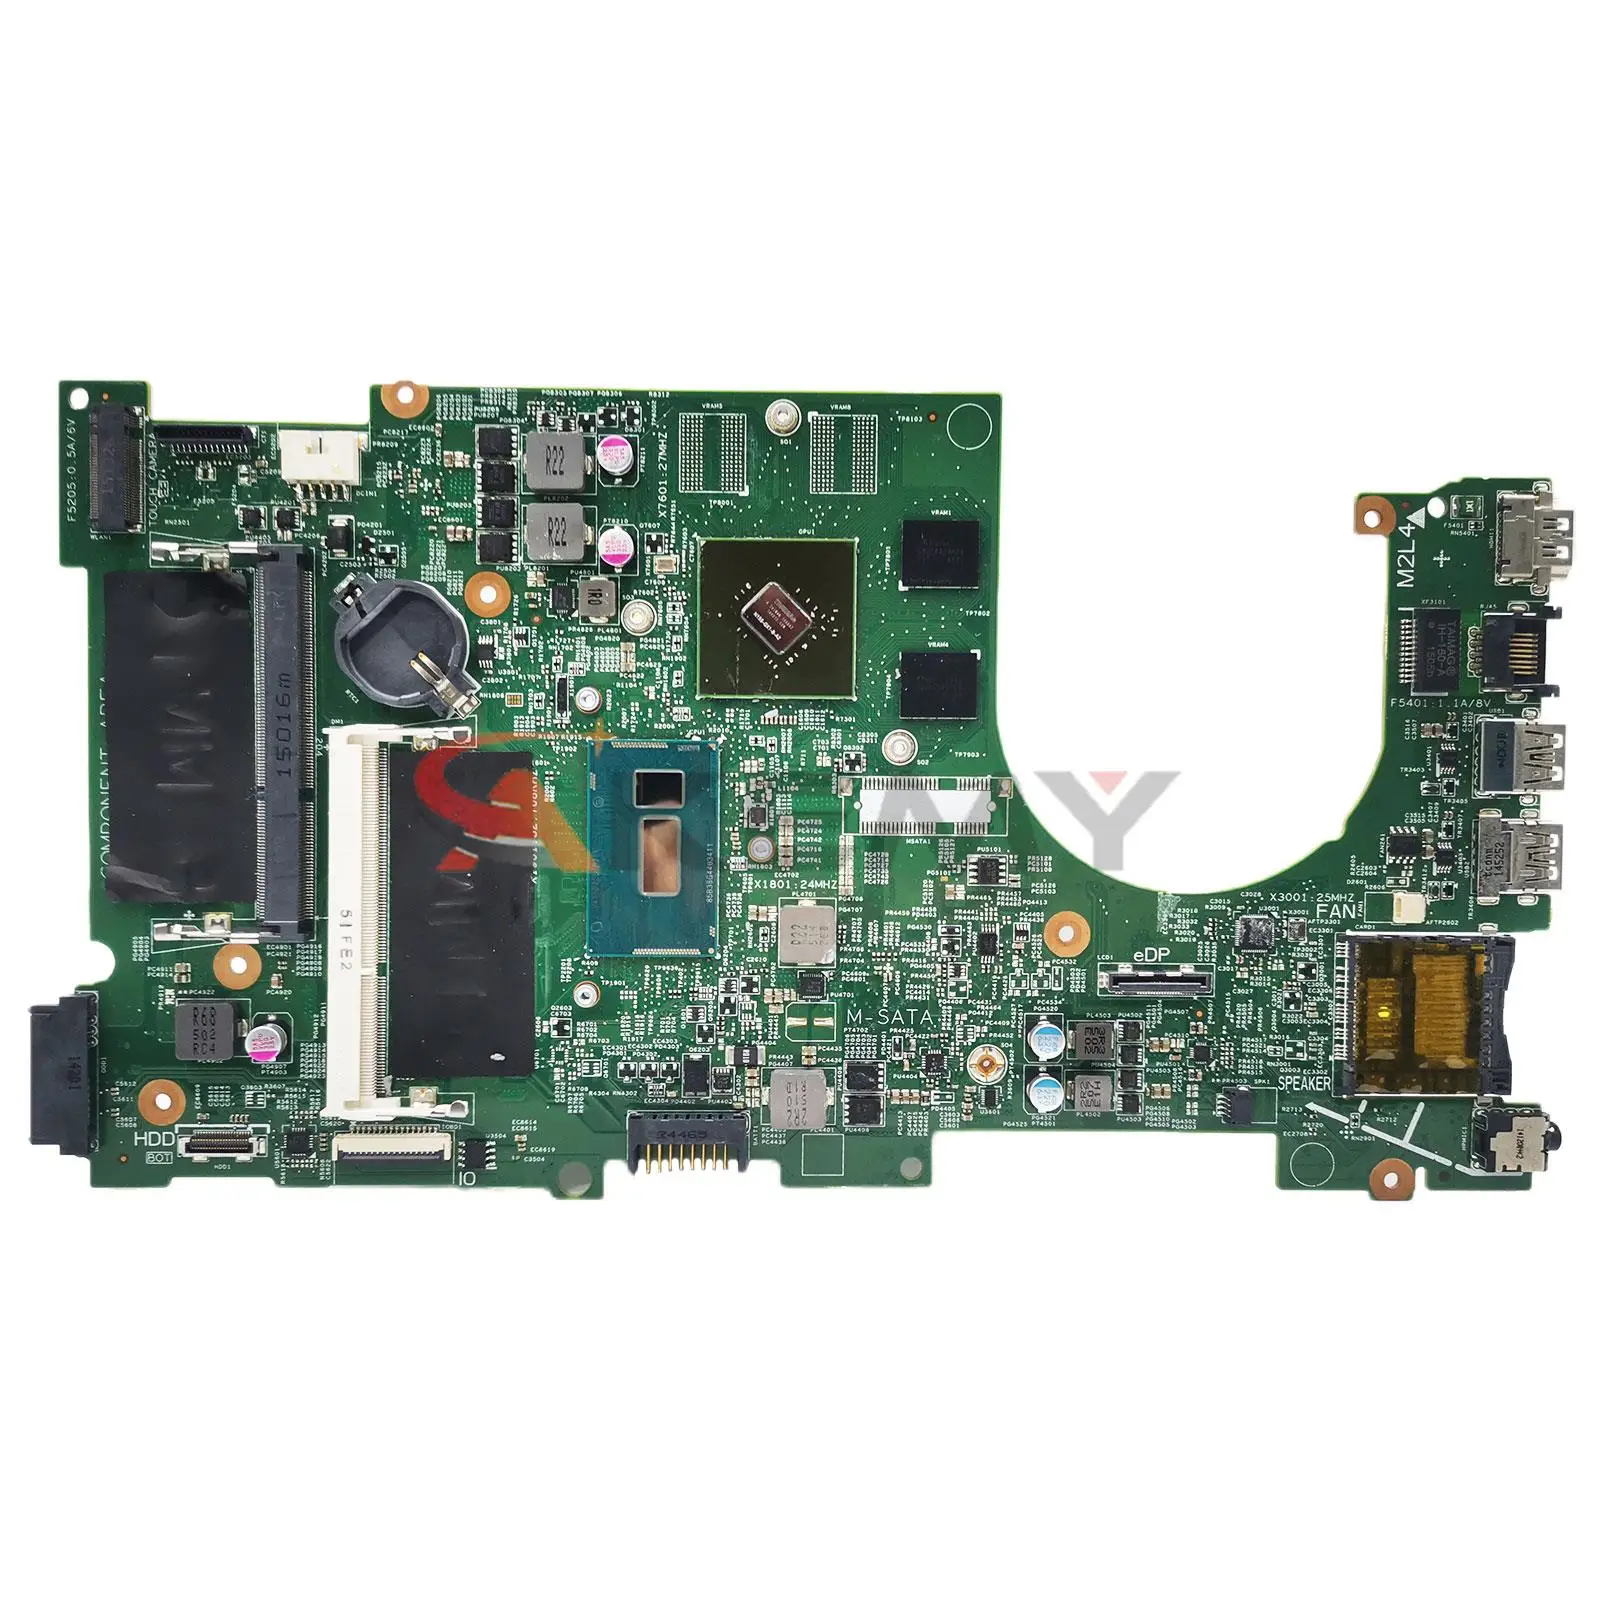 

14202-1 i5 i7 5th Gen CPU 845M/2G GPU CN-0FR6H6 0FGHK9 Mainboard For DELL Inspiron 17 (7746) Laptop Motherboard 100% testing ok